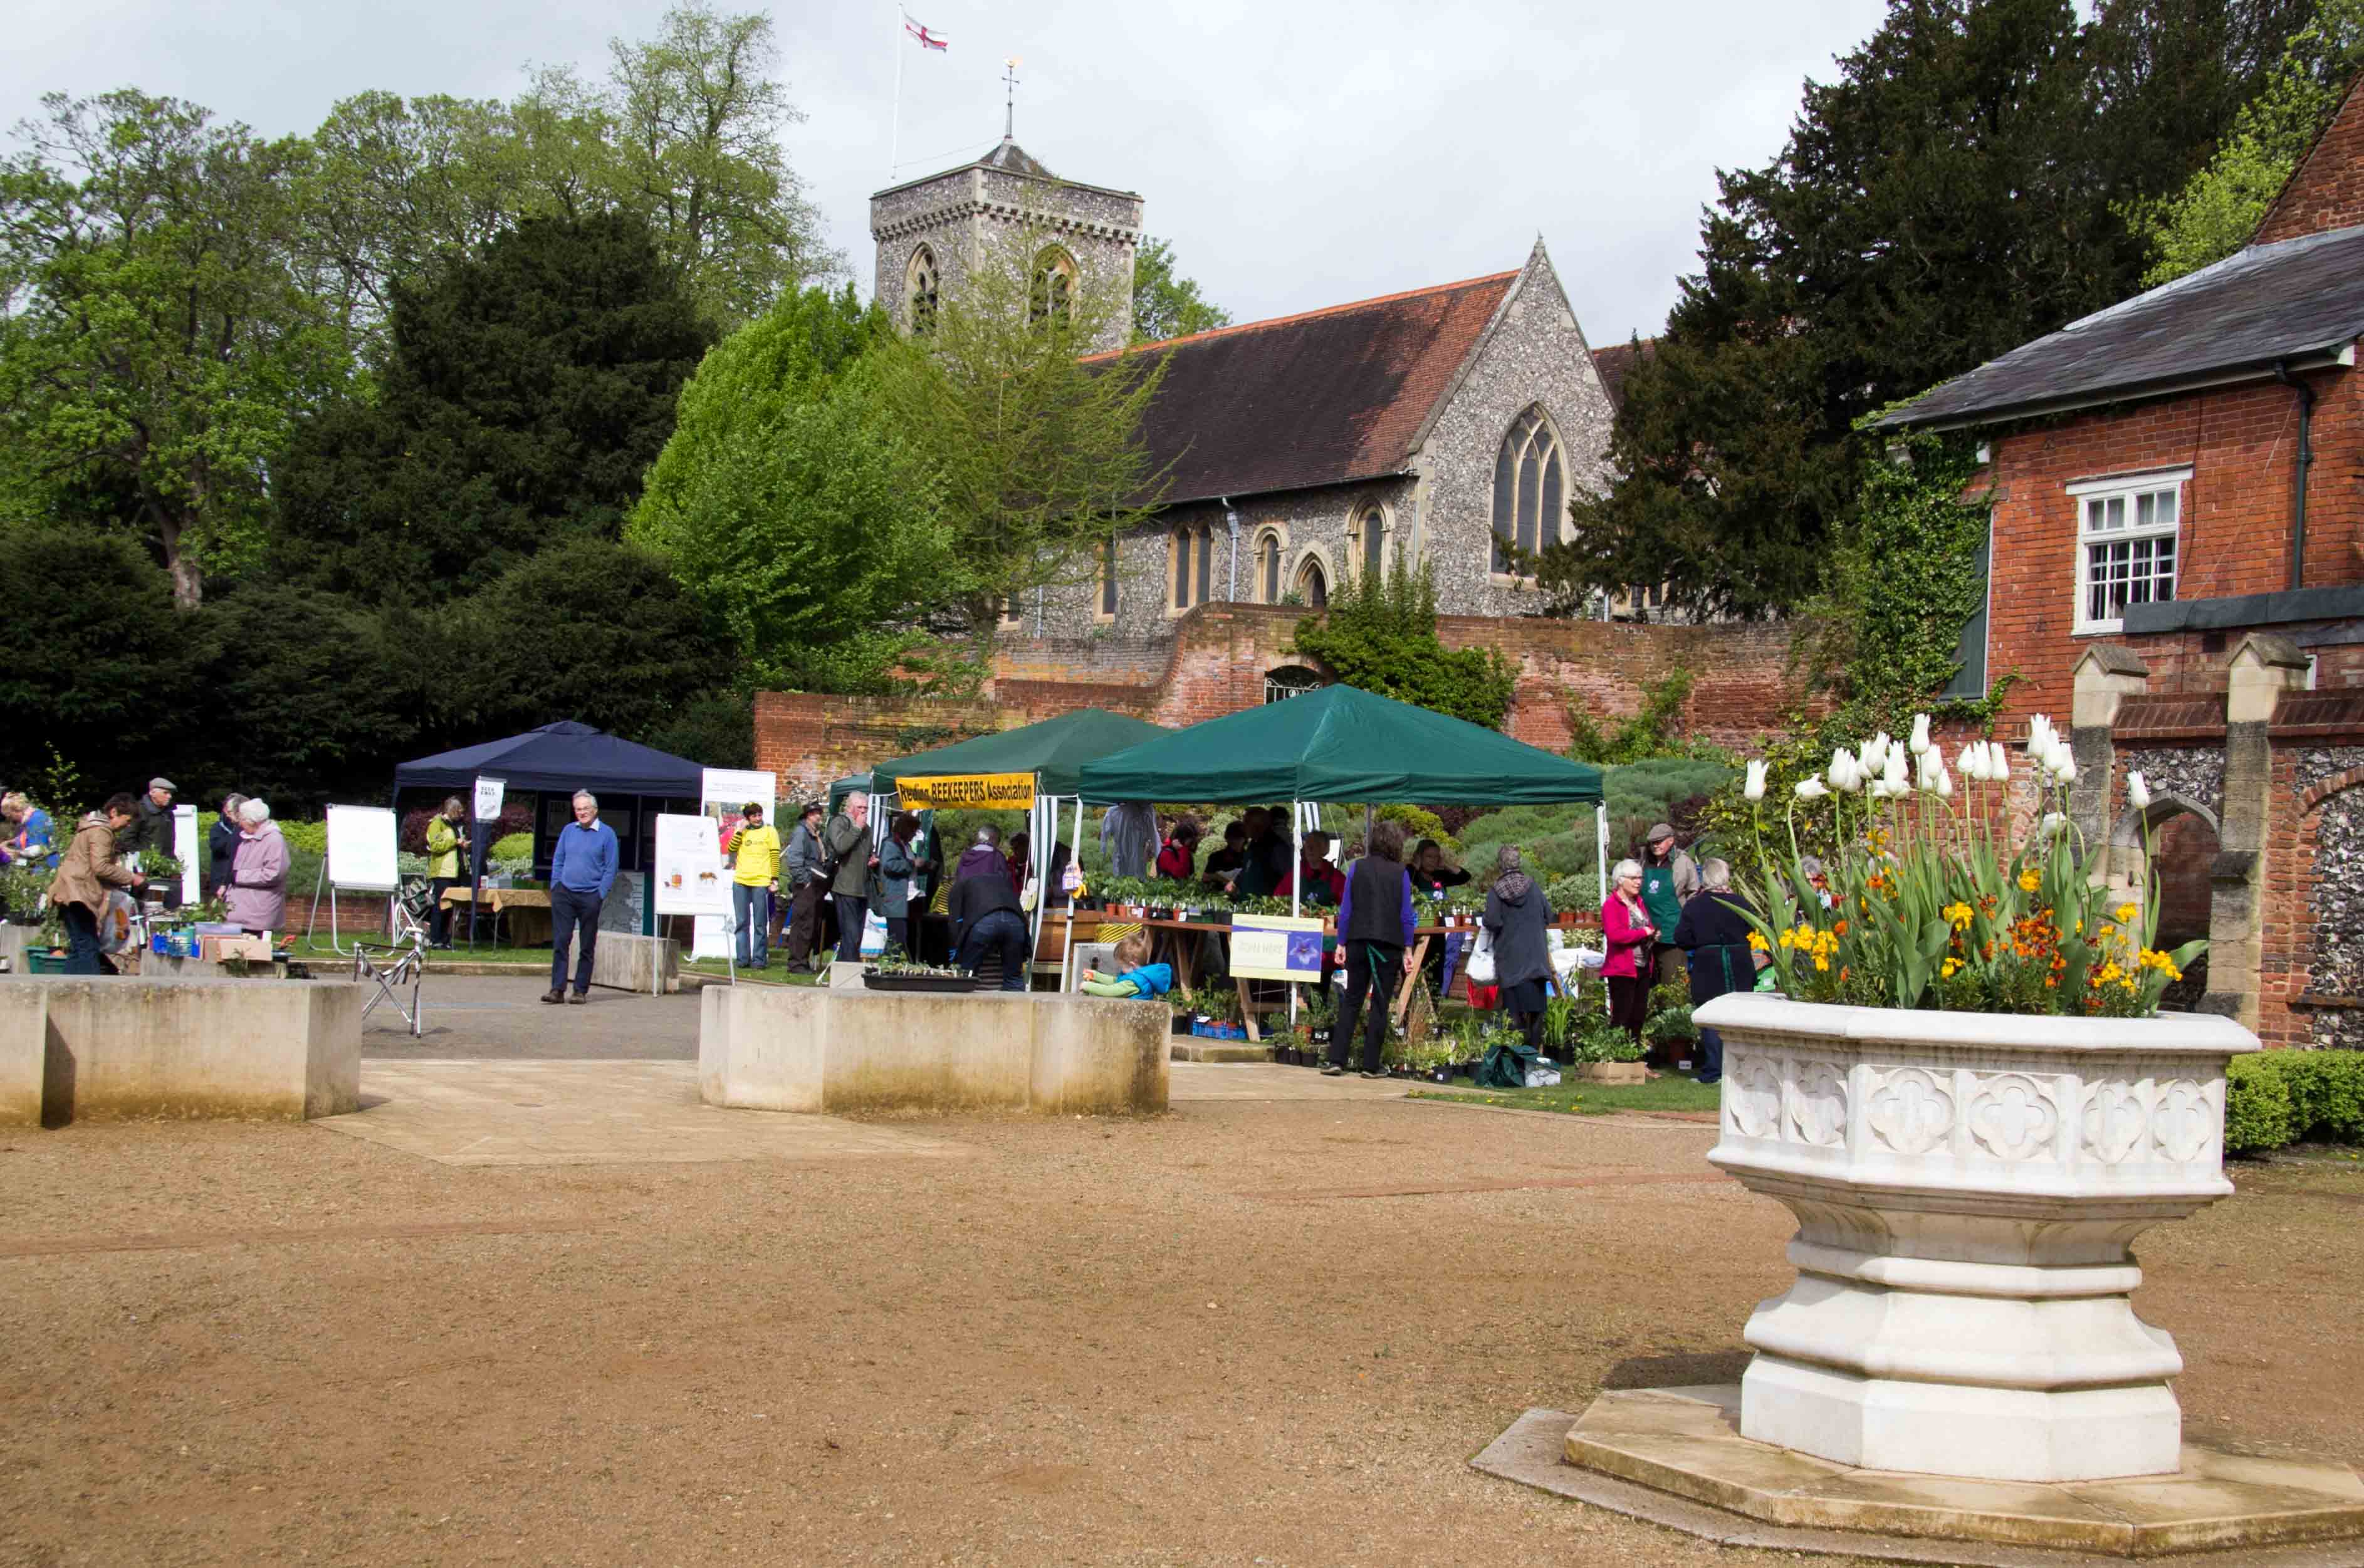 A picturesque setting for the stalls with the church in the background